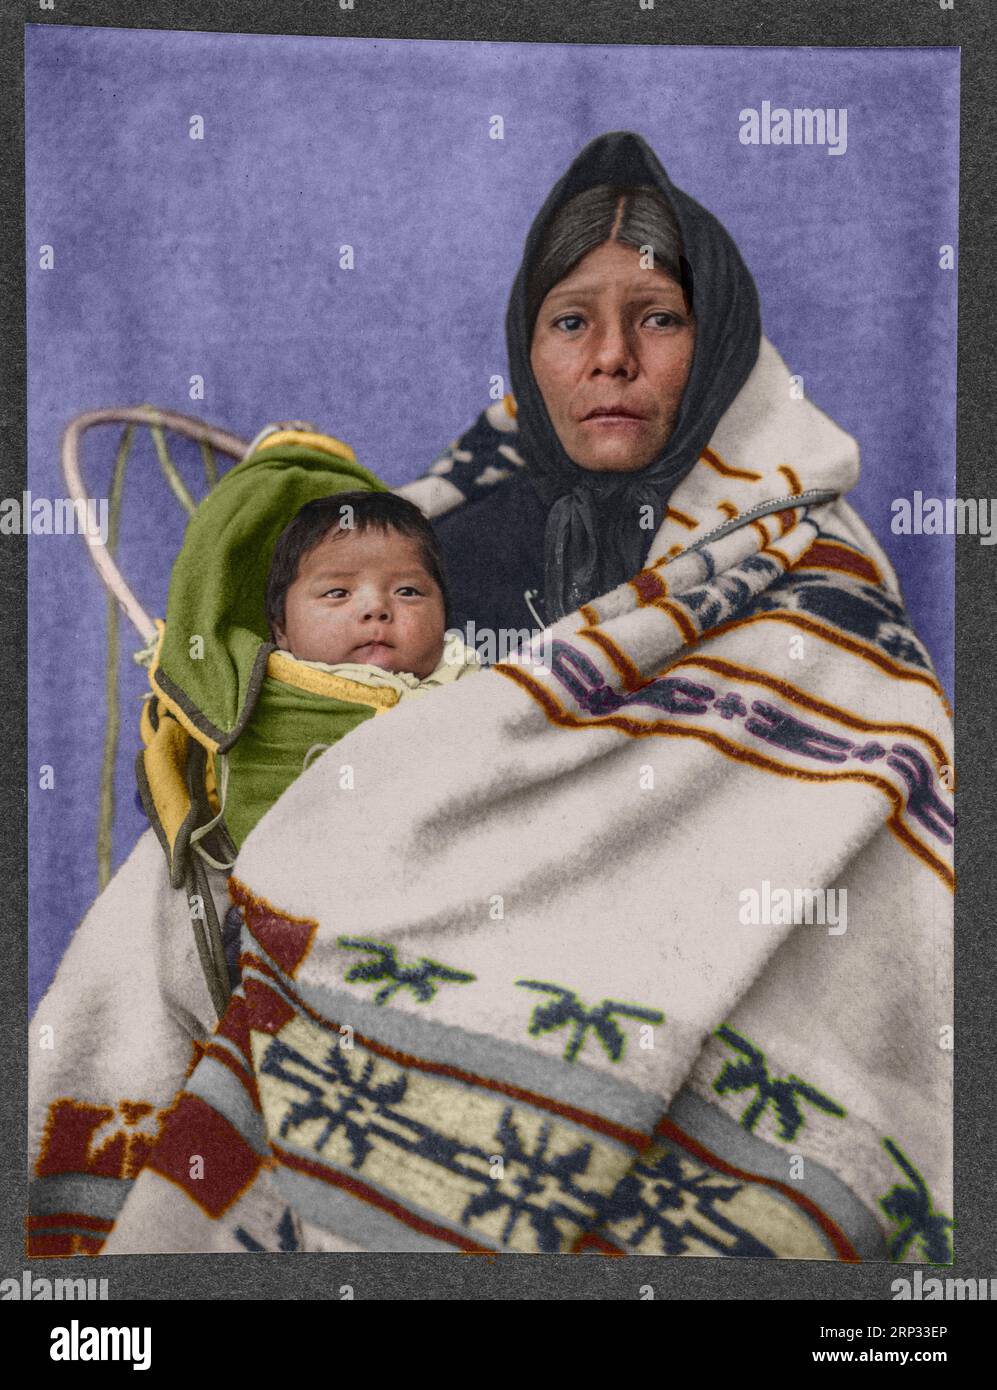 Yakima squaw and papoose. Photograph shows a Yakima Indian woman, half ...